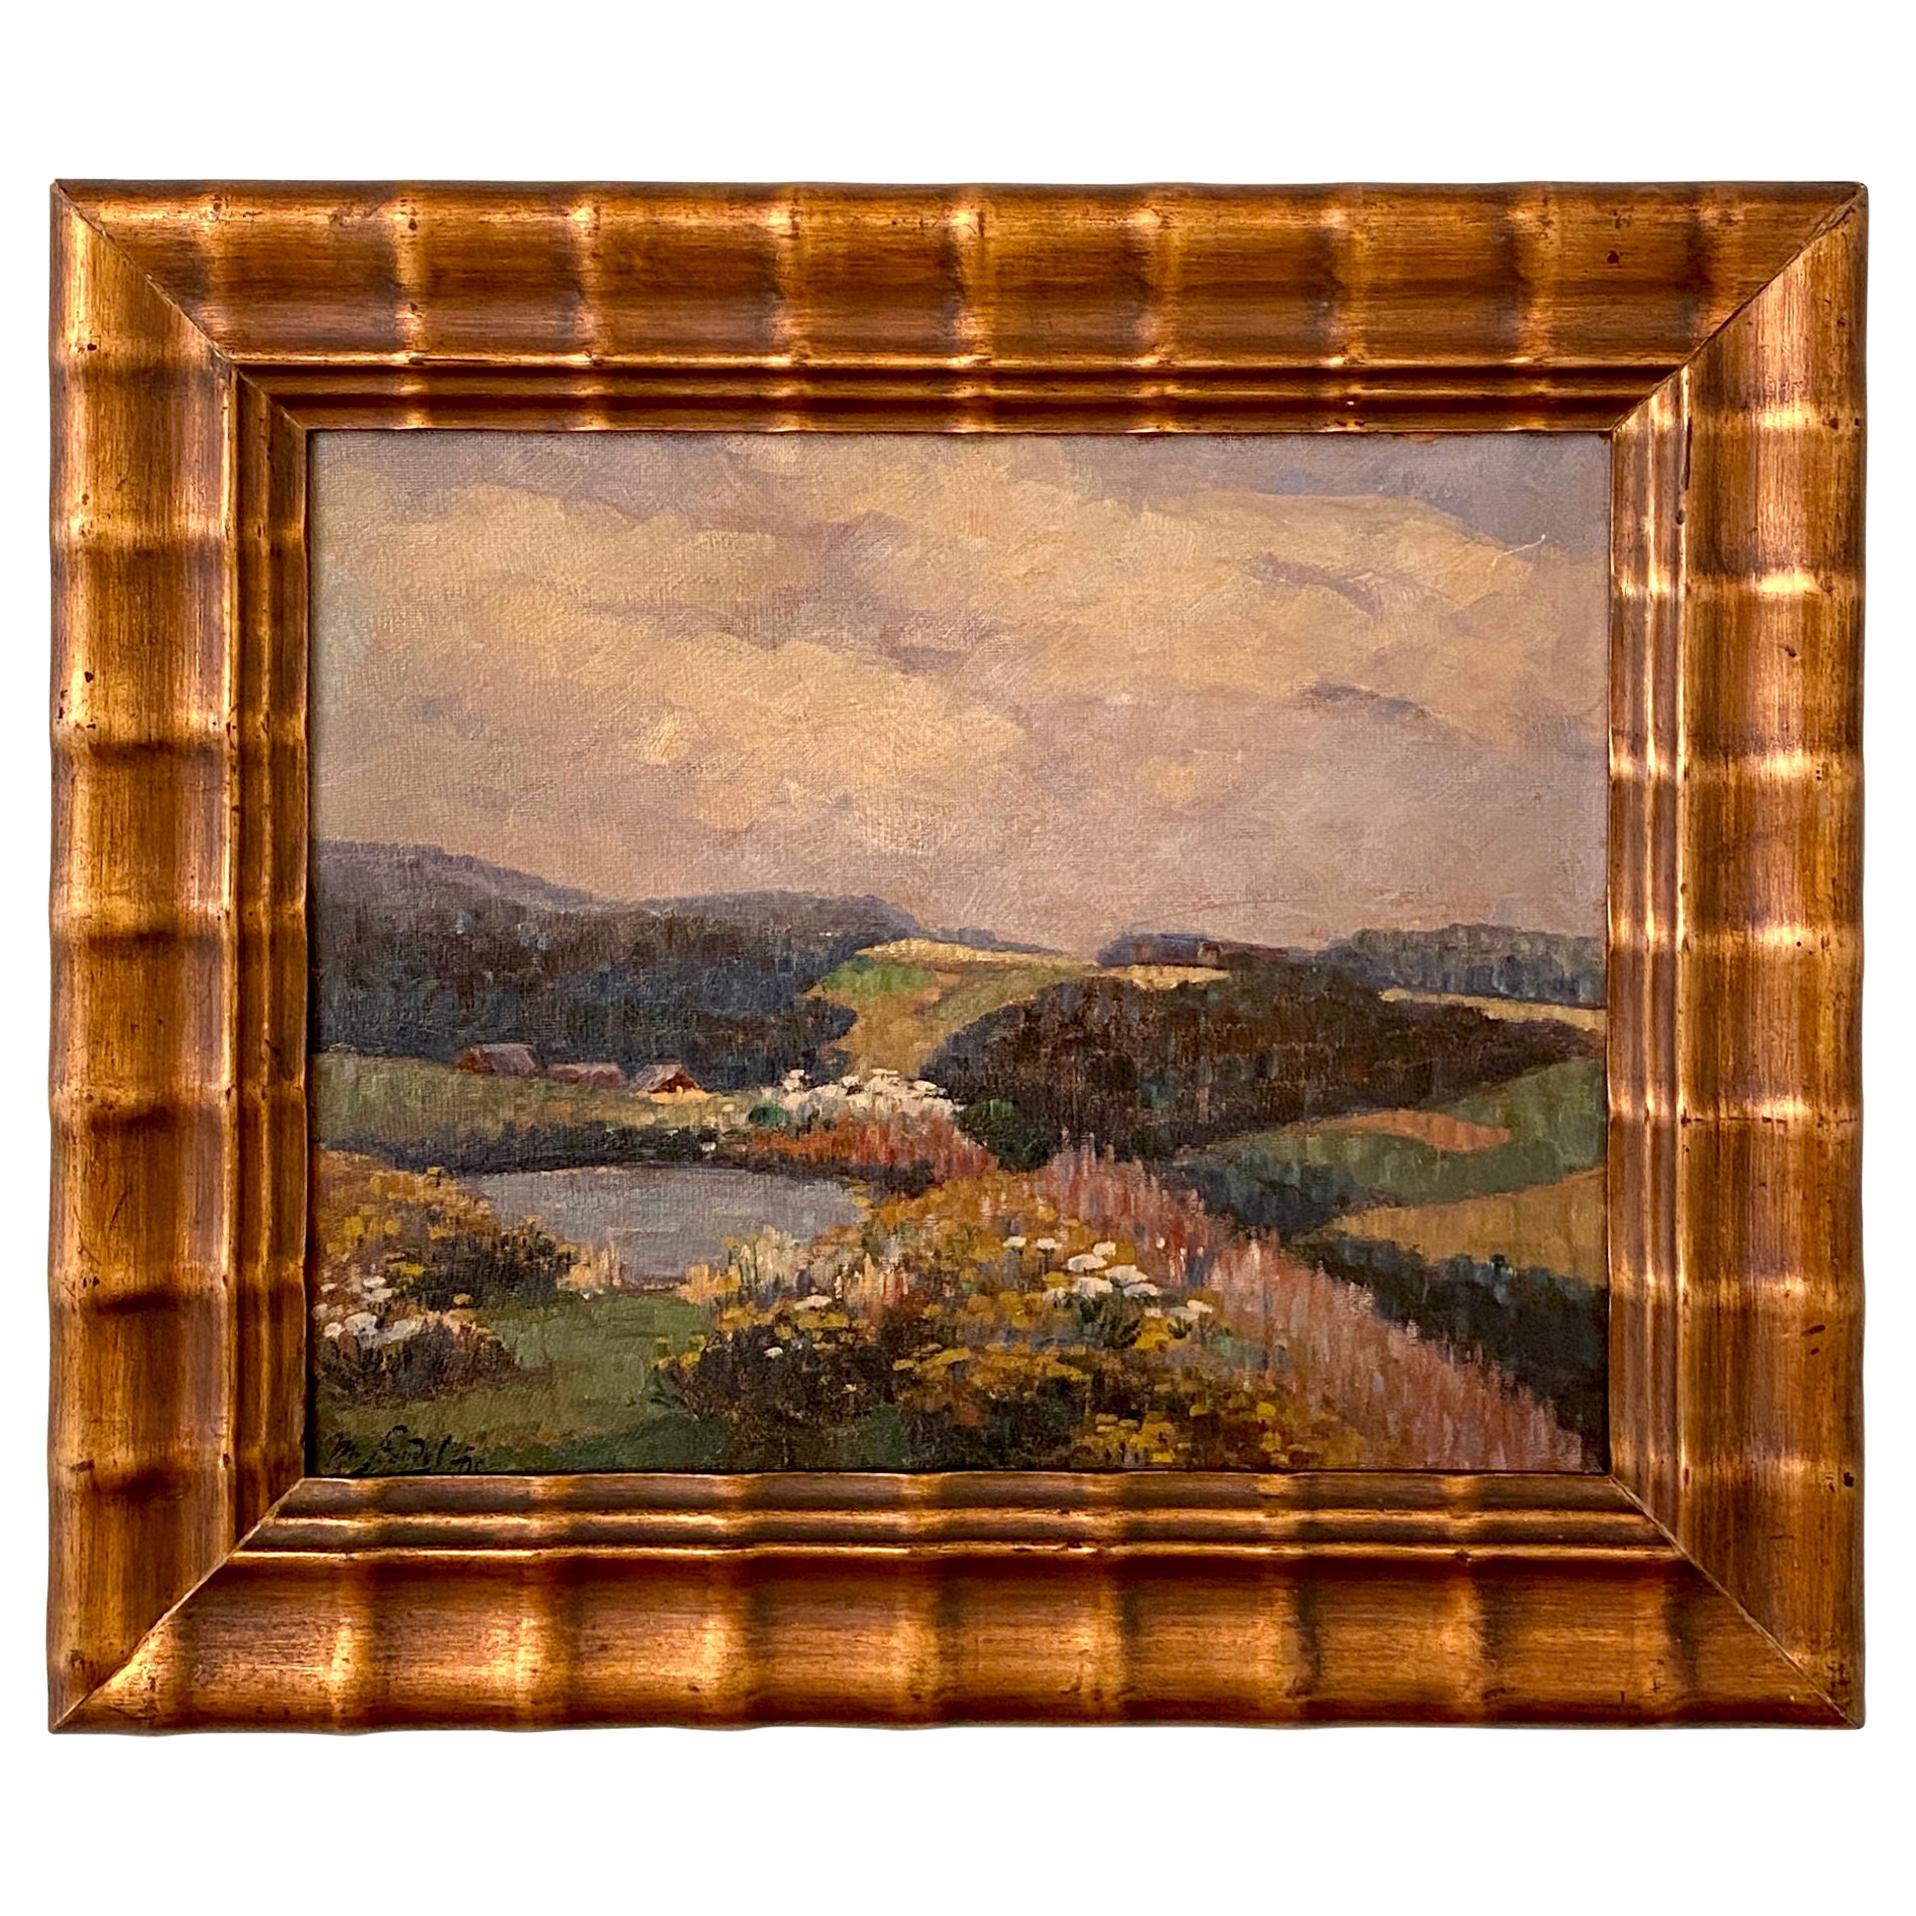 Early 20th Century German Art Deco Landscape Oil Painting Frame, circa 1920